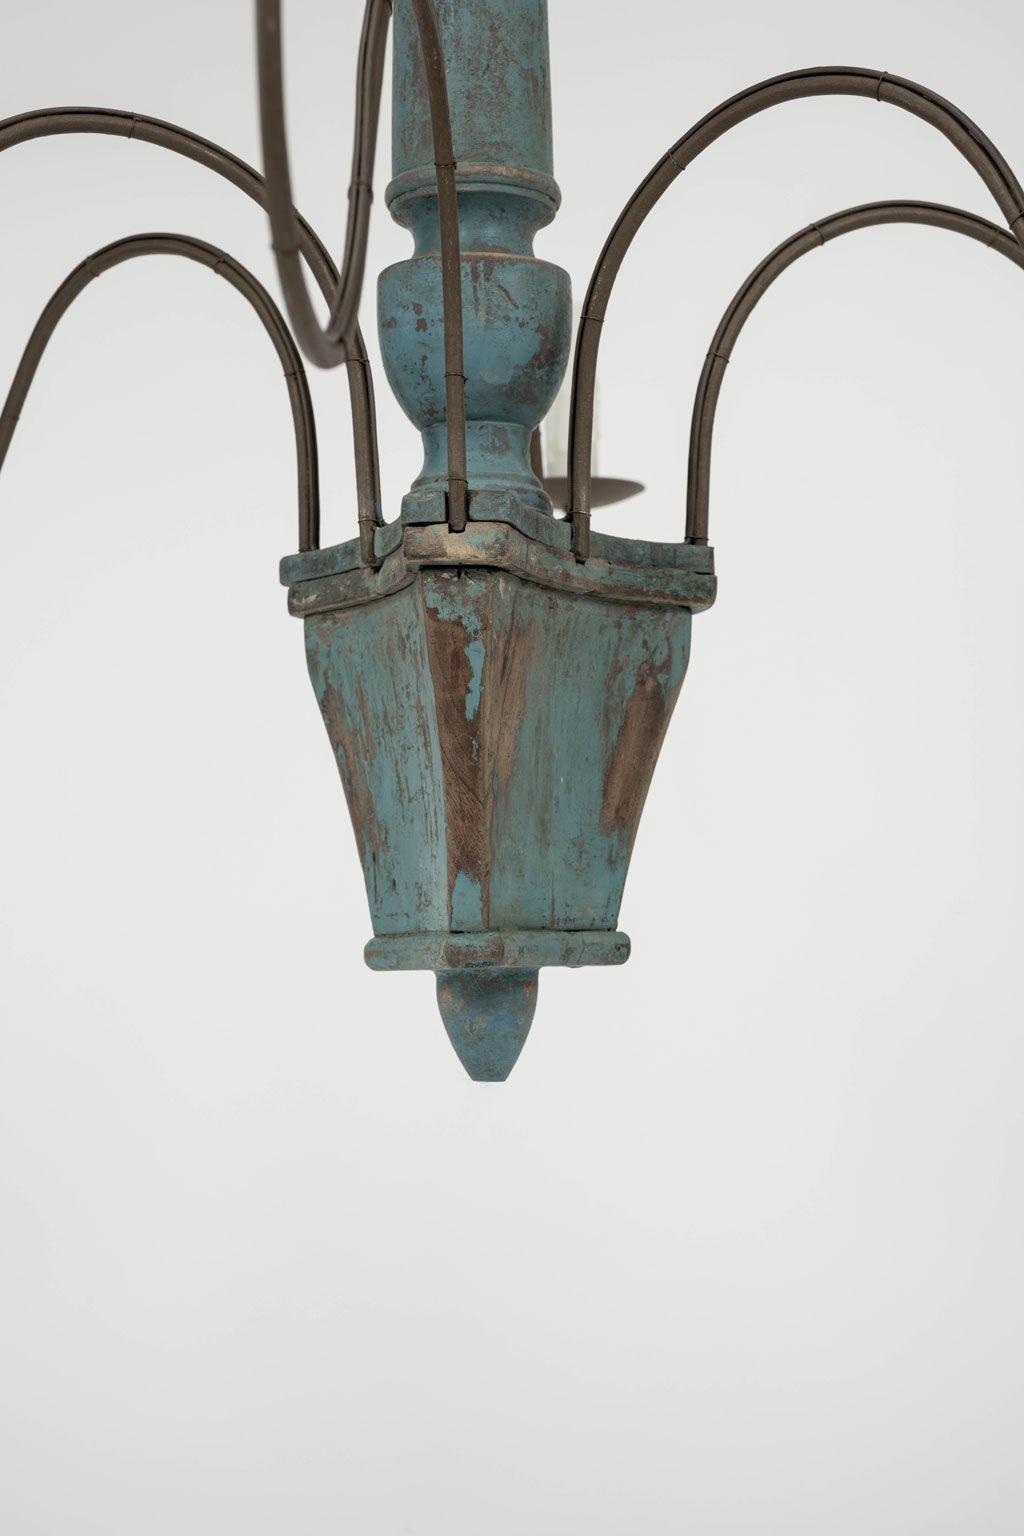 Contemporary Wood and Iron Teal-Painted Italian Chandelier For Sale